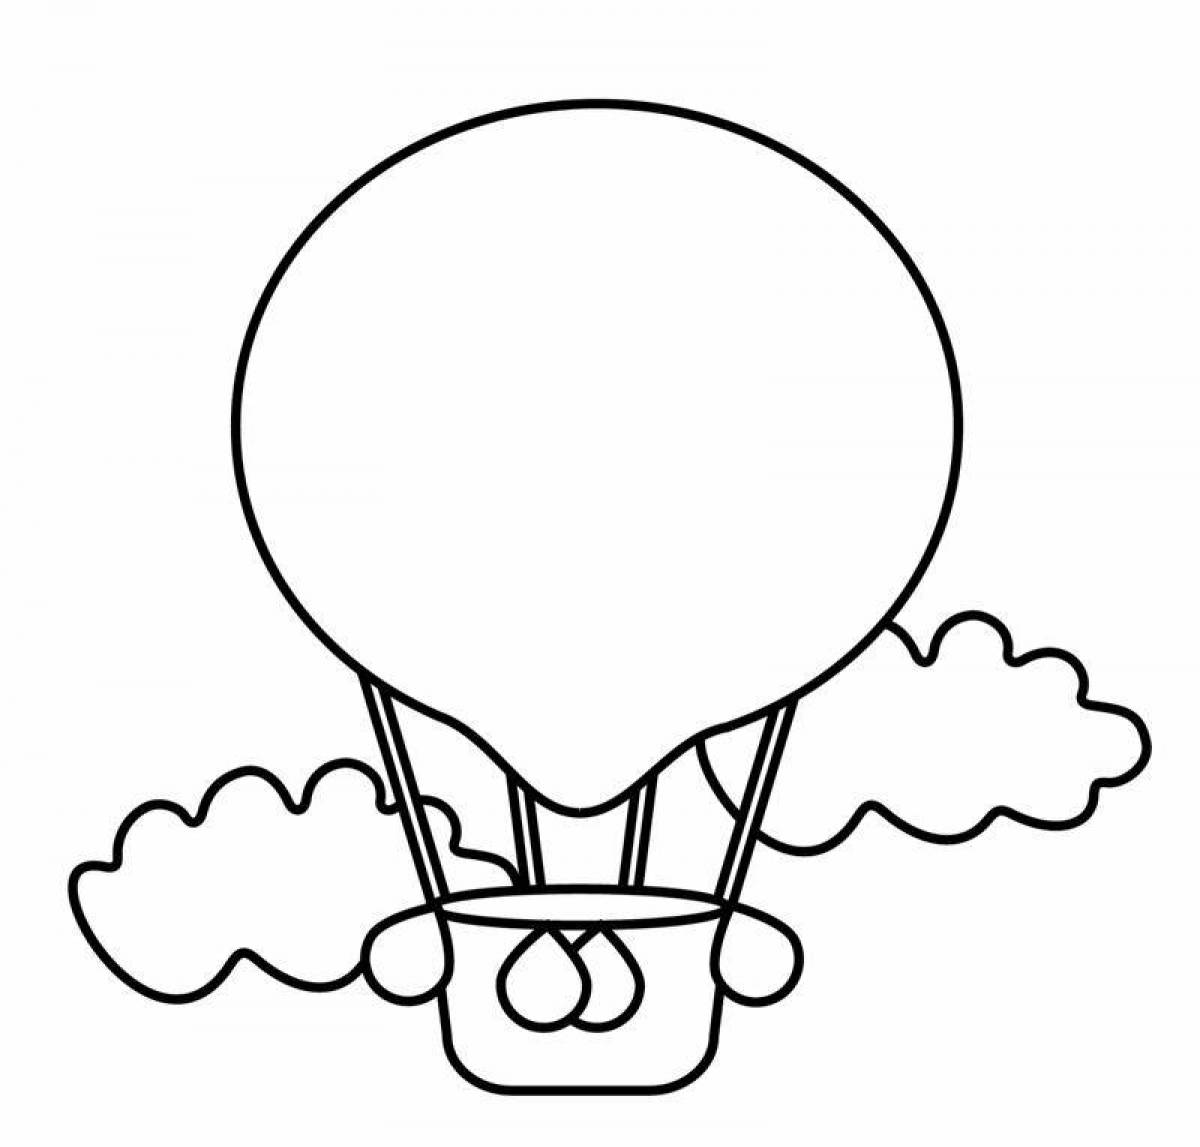 Playful coloring page with balloons for kids